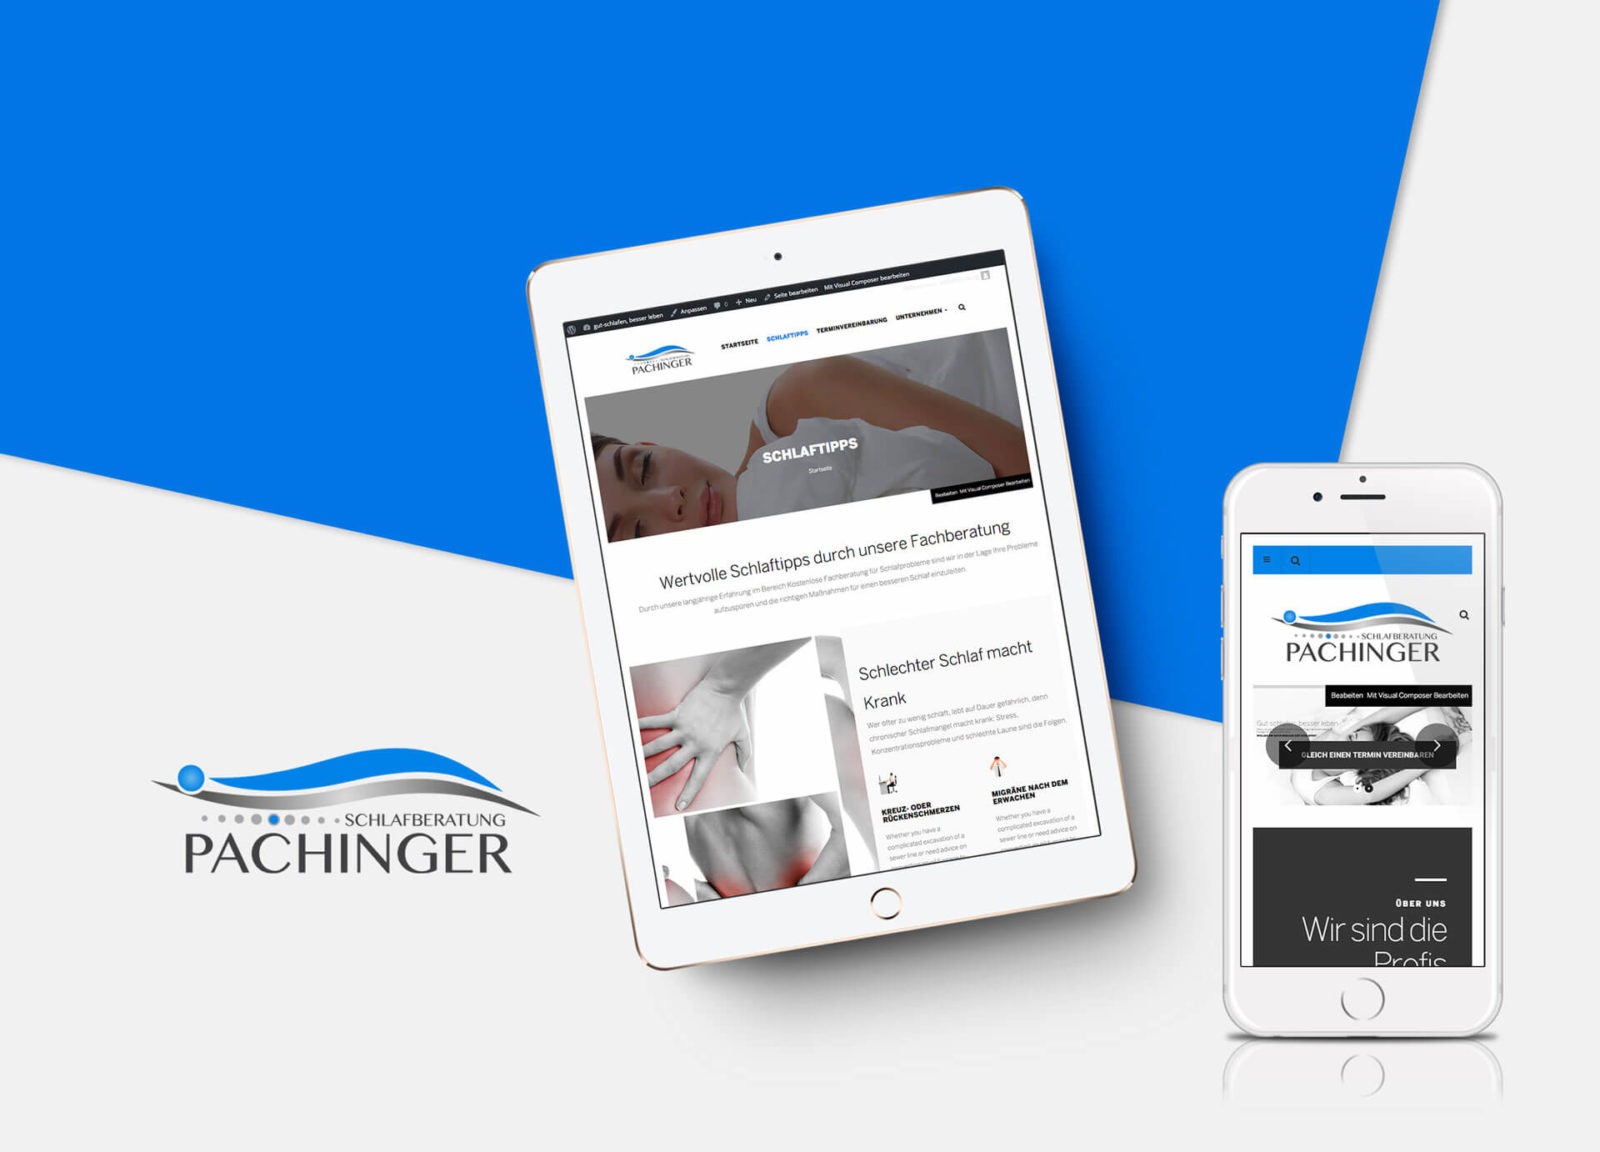 Mobile Website Schlafberatung Pachinger